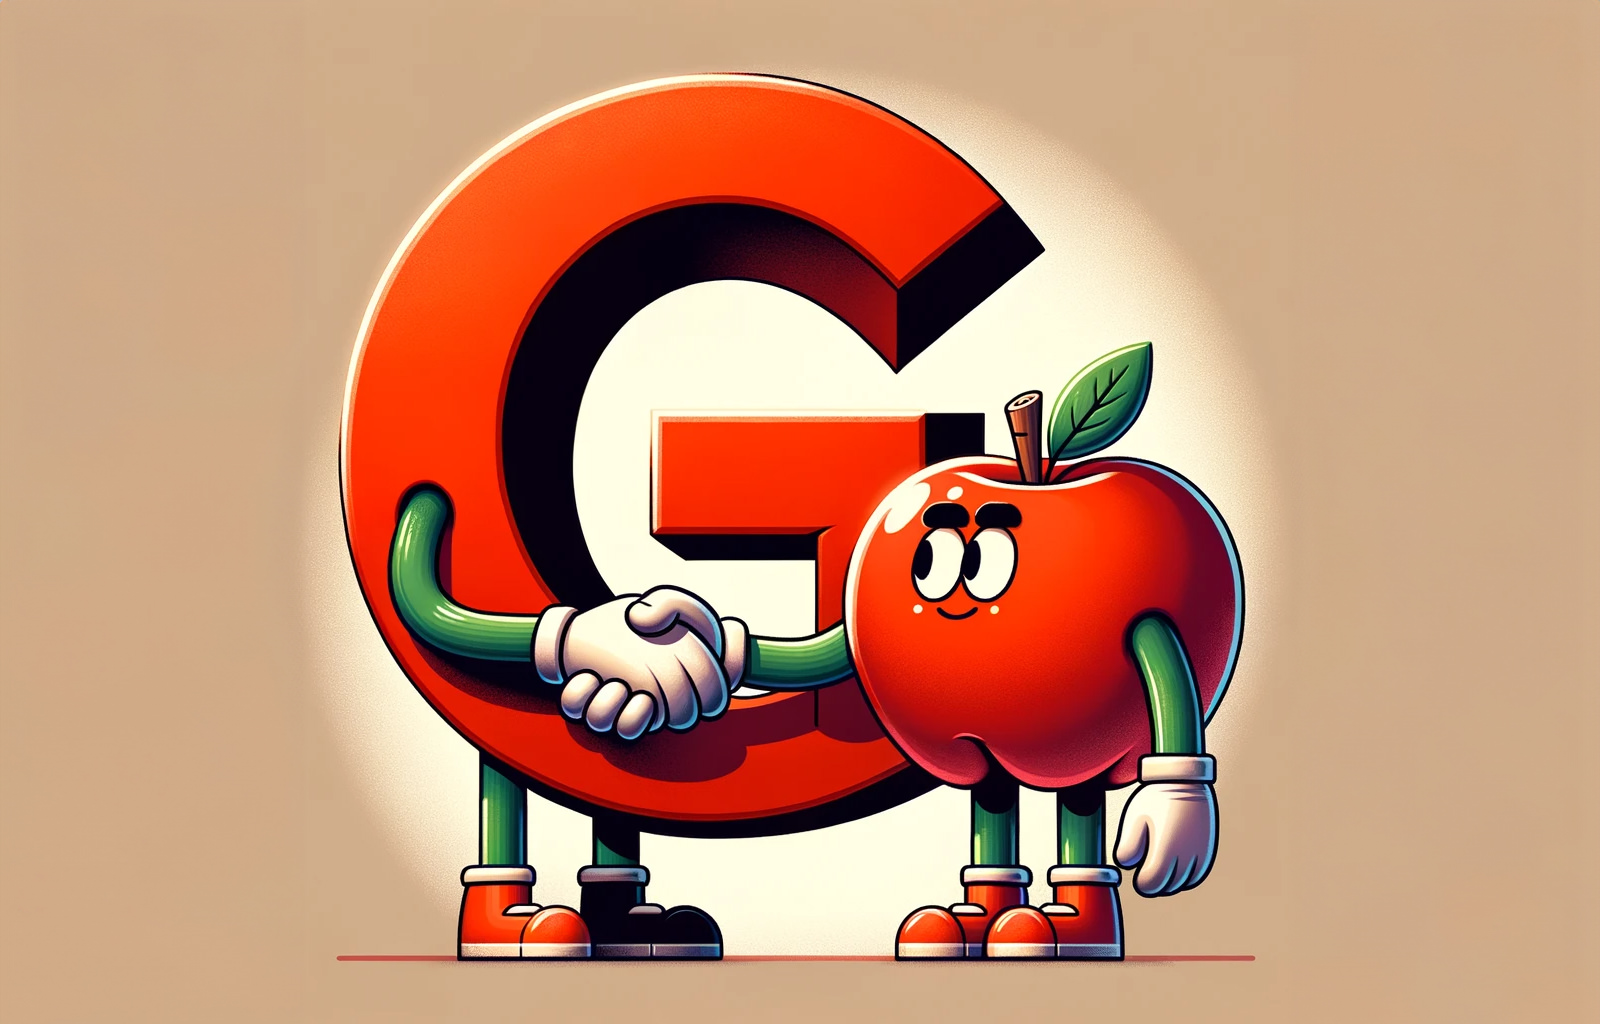 Google and Apple shaking hands